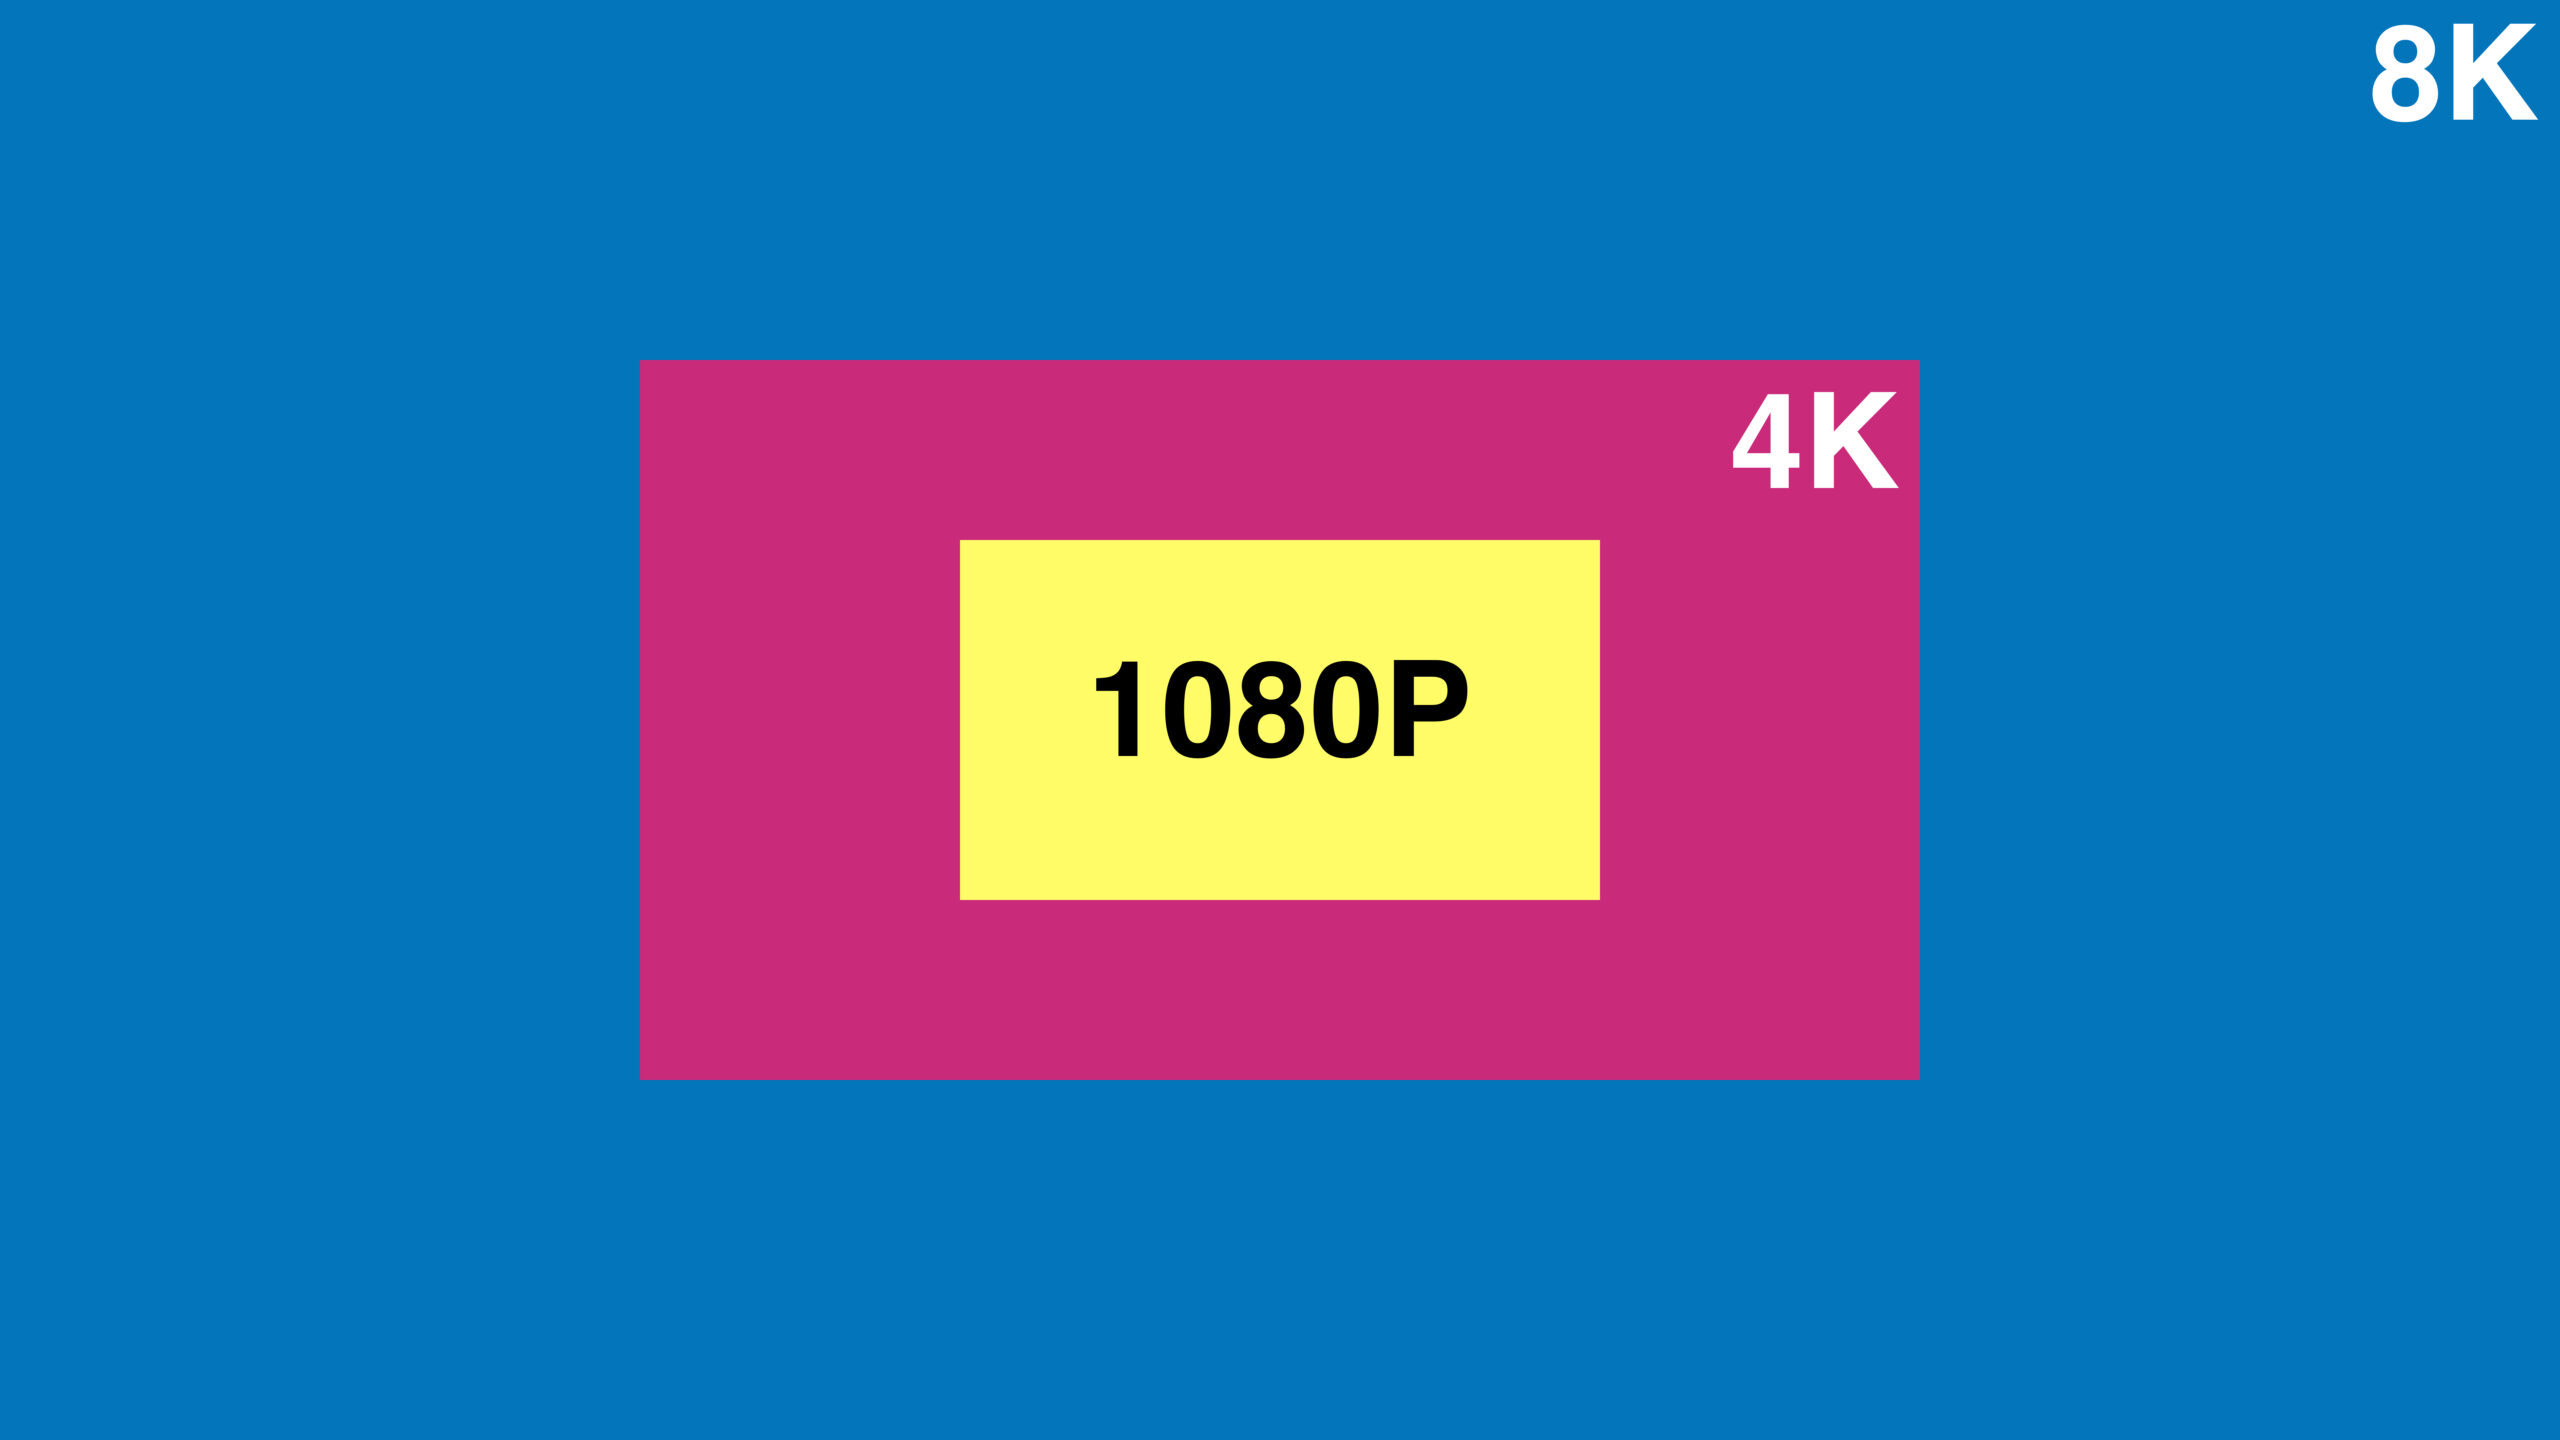 This chart shows the pixel difference between an 8K, 4K, and 1080P image.